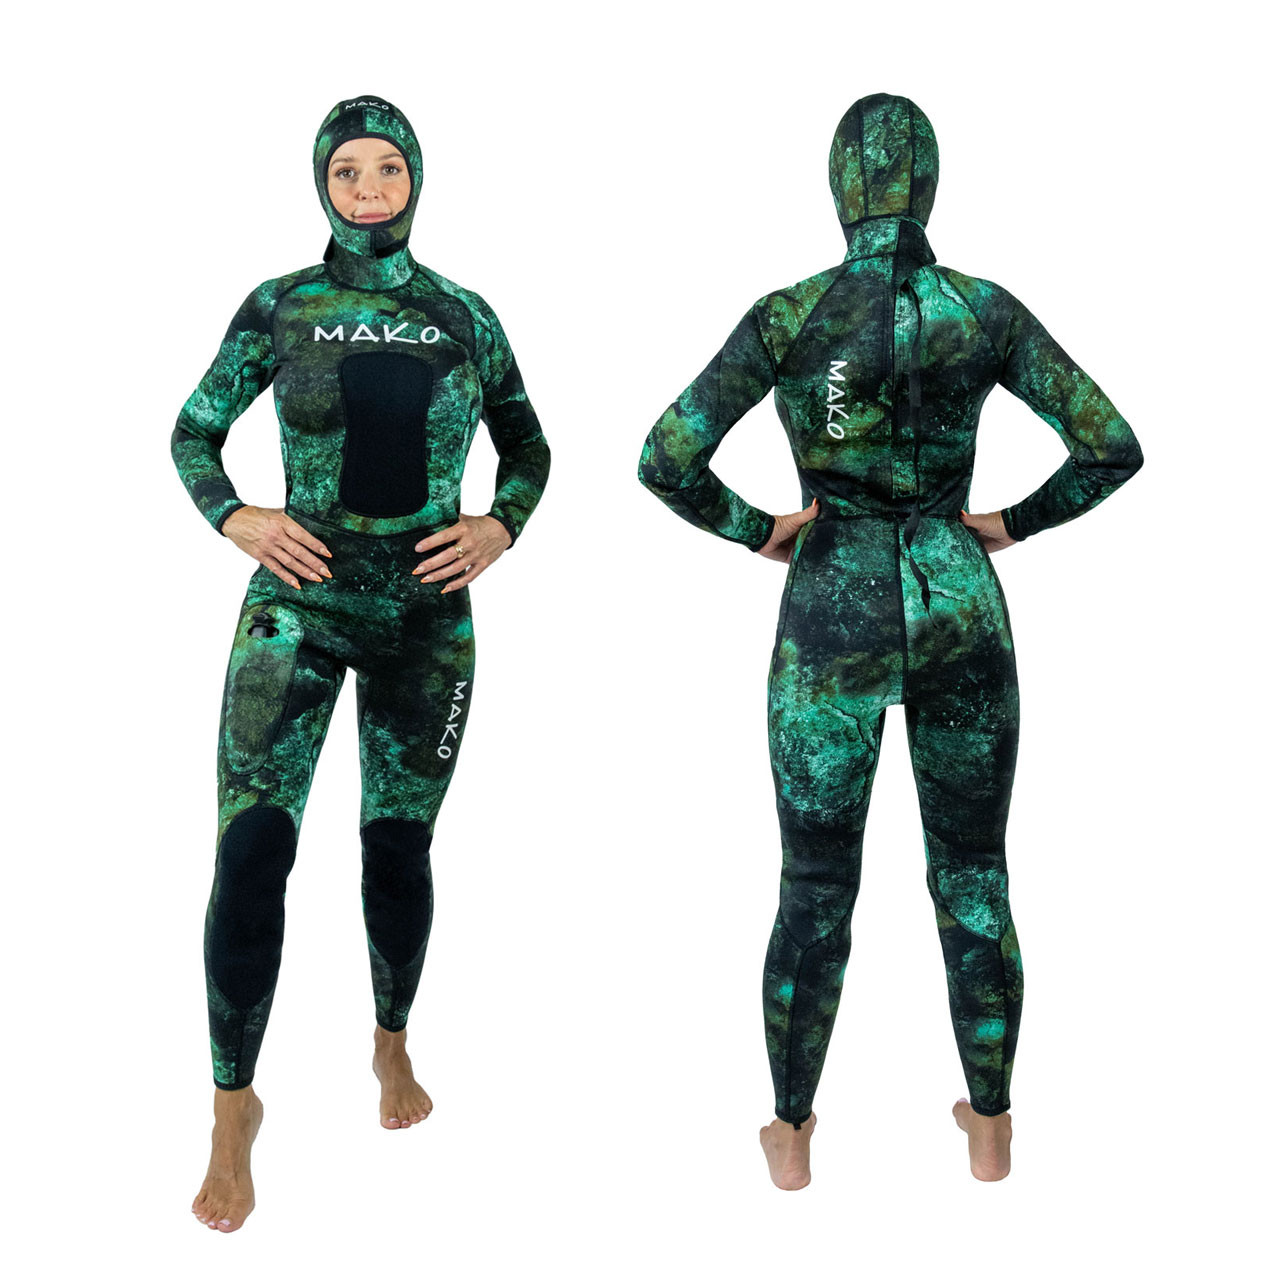 Spearfishing wetsuit - Blue Water / Green / Dual Camo / Reef Camo - Rob  Allen - one-piece / with hood / other